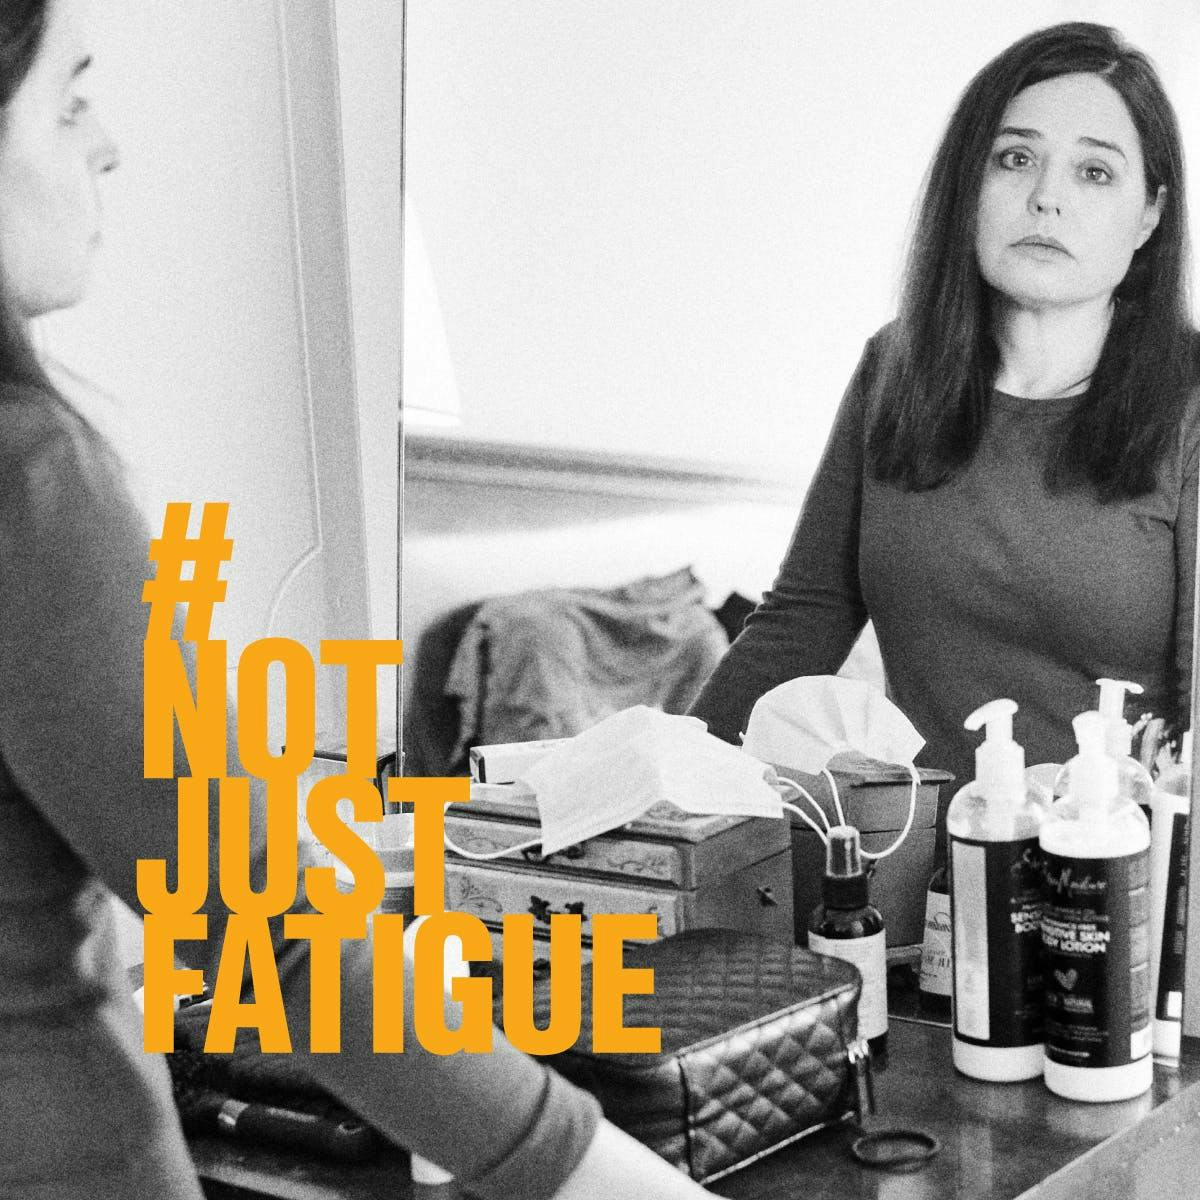 #NotJustFatigue photo of a woman standing in front of mirror